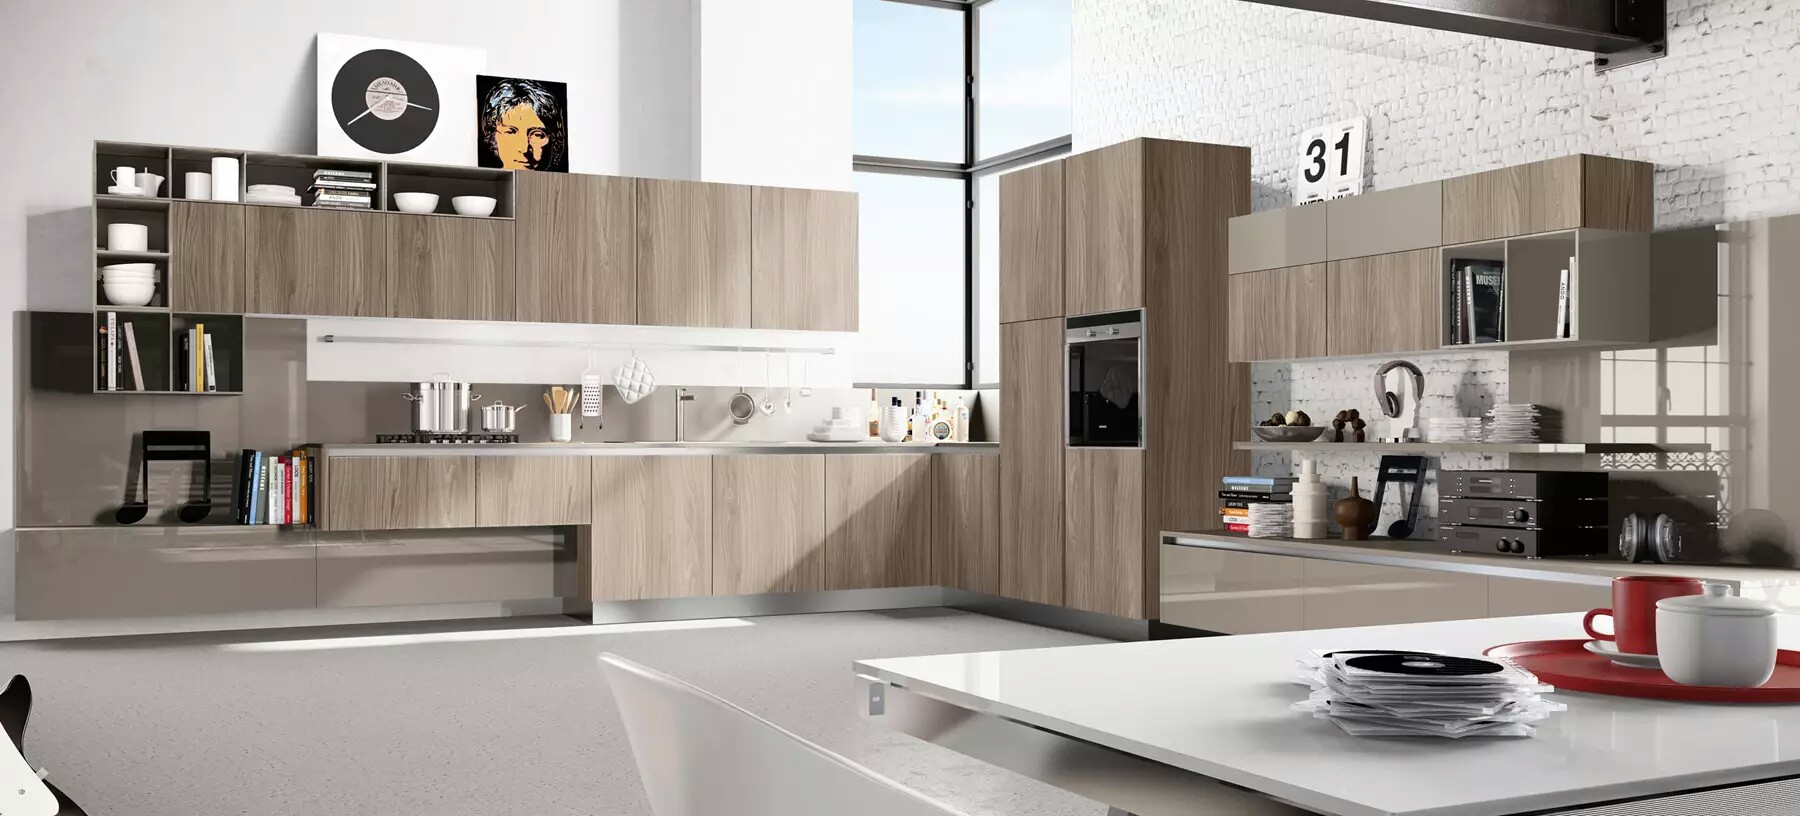 Modern Kitchen Interior Design Ideas With Brown Wooden Cabinets And White Dining Sets Also Brick Exposed Walls Accents